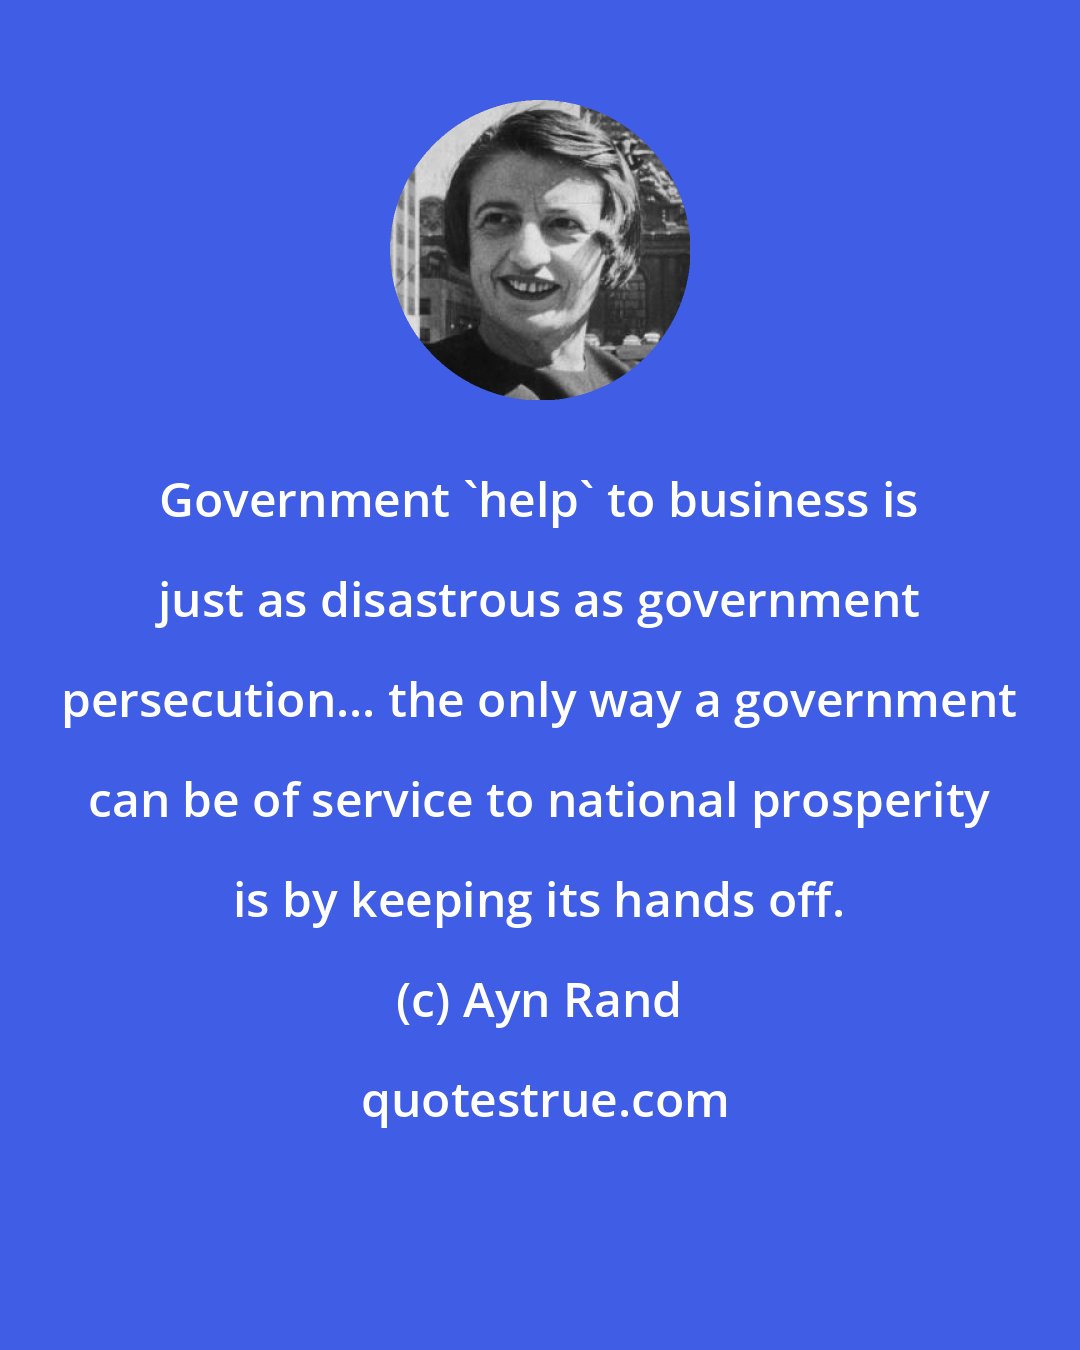 Ayn Rand: Government 'help' to business is just as disastrous as government persecution... the only way a government can be of service to national prosperity is by keeping its hands off.